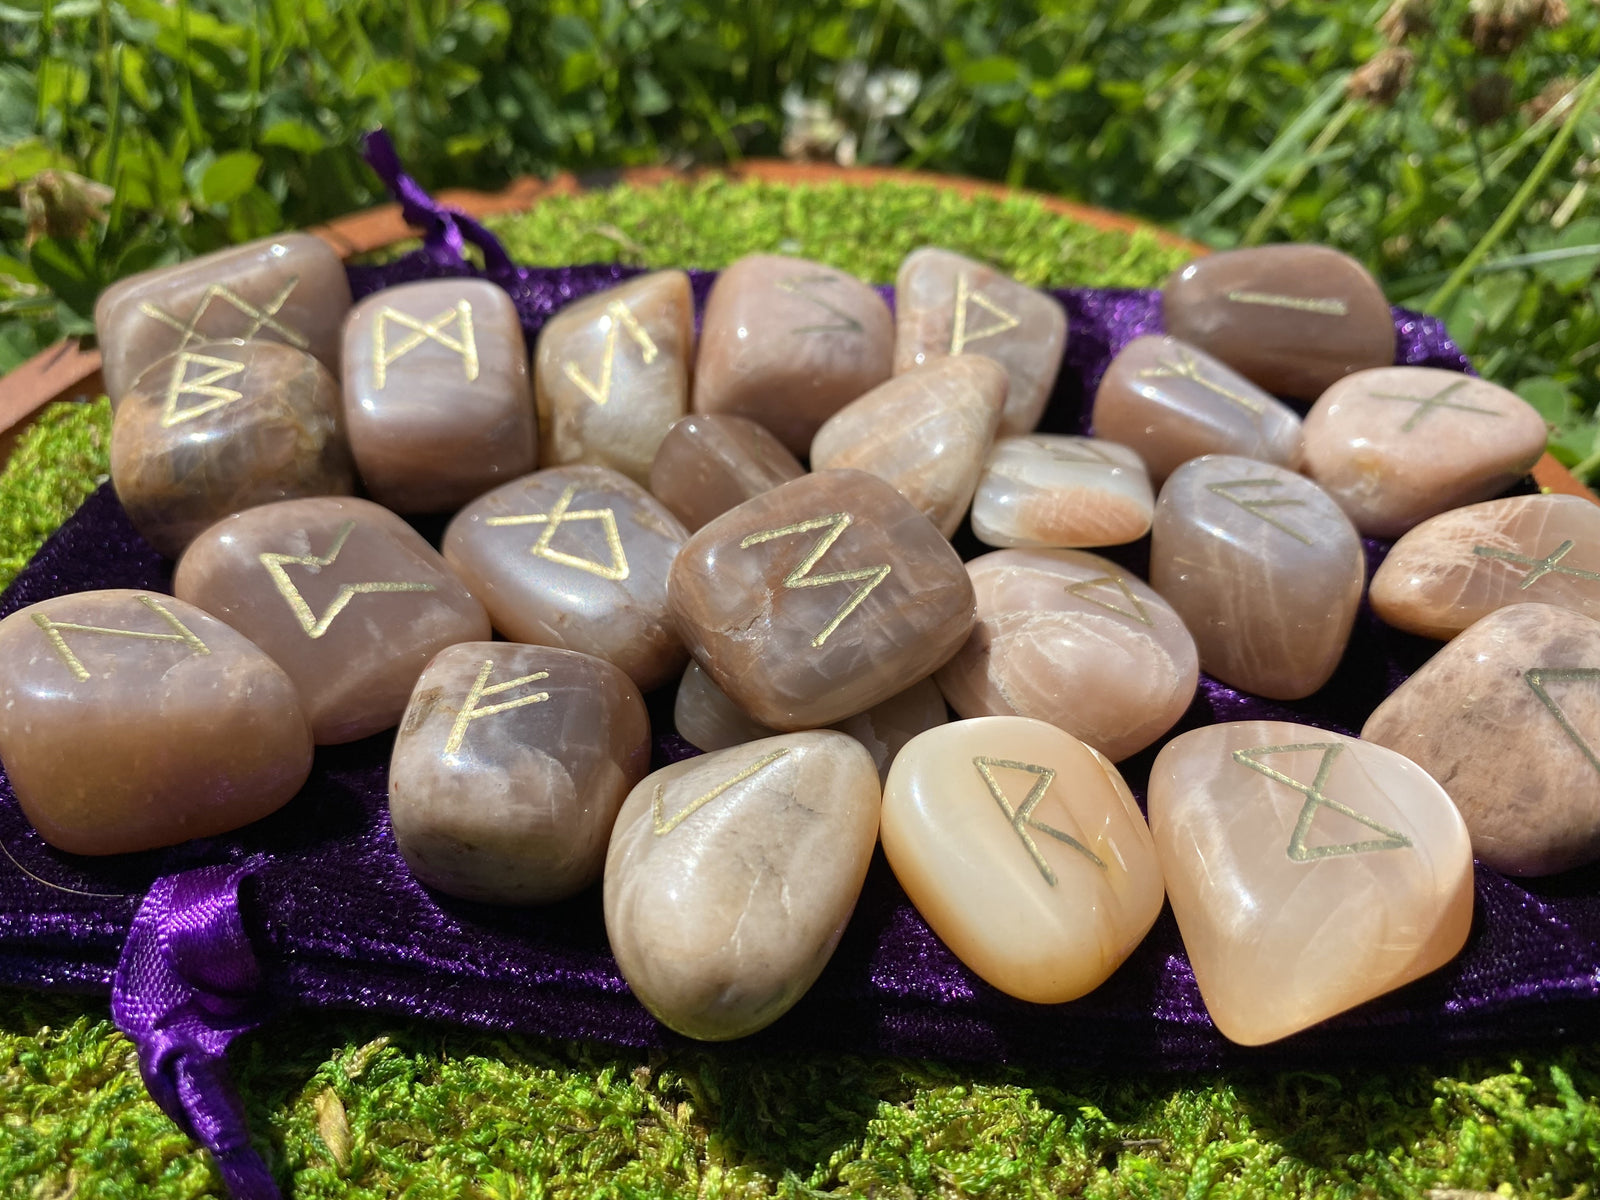 Moonstone rune sets of 25 engraved stones. Variety of styles, Futhark, Angel, Reiki symbols, Astrology, Theban, witch's Runes and more. Custom orders welcome